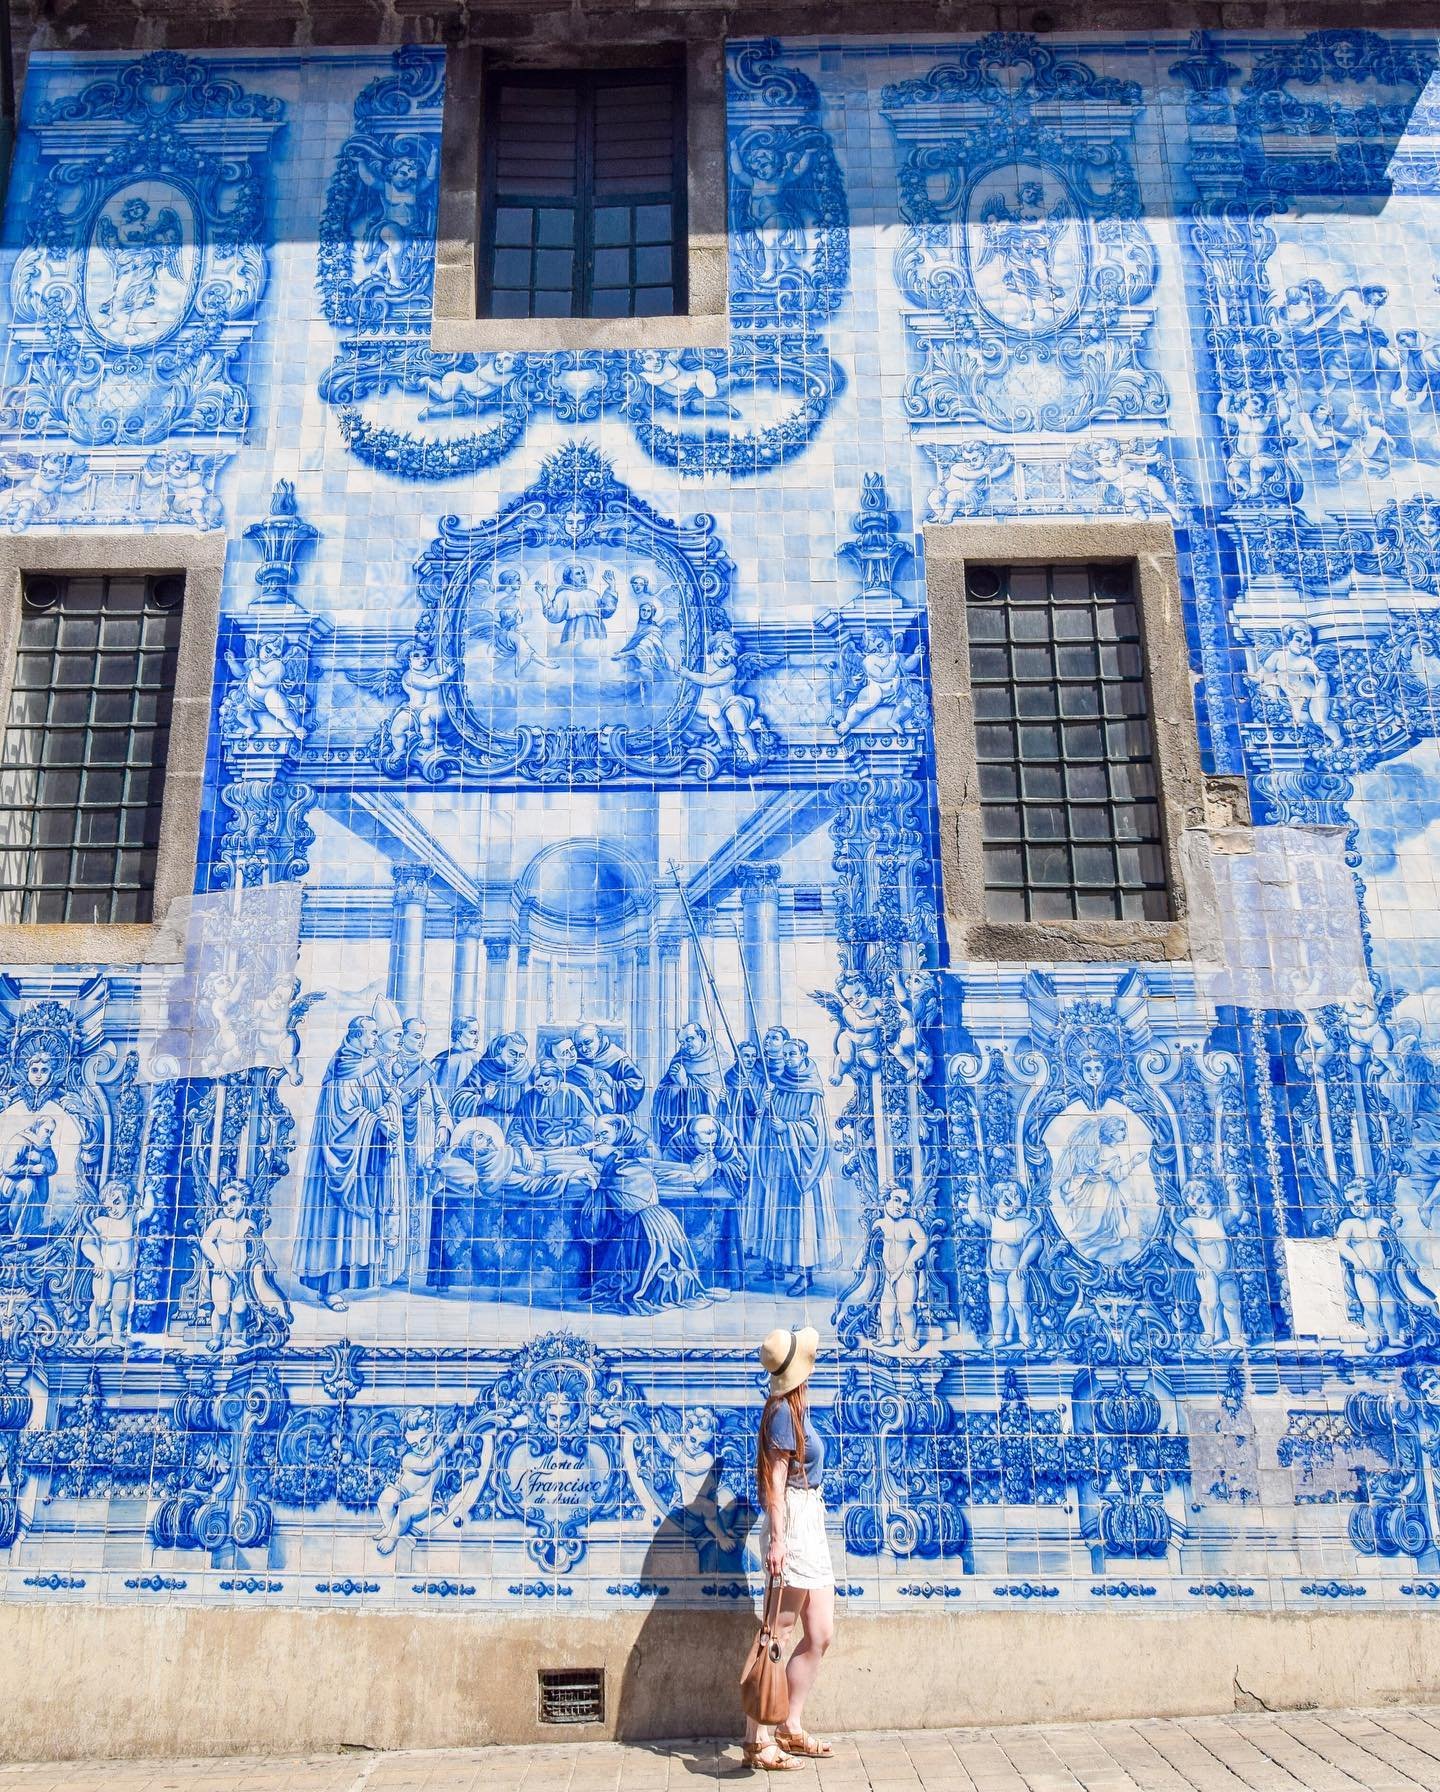 I think we all need a few more azulejos in our lives. That&rsquo;s the name of the painted ceramic tiles you see all over Portugal 💙
⠀⠀⠀⠀⠀⠀⠀⠀⠀
Their omnipresence in the country is thanks to Manuel I who was Portugal&rsquo;s king between 1495 and 152